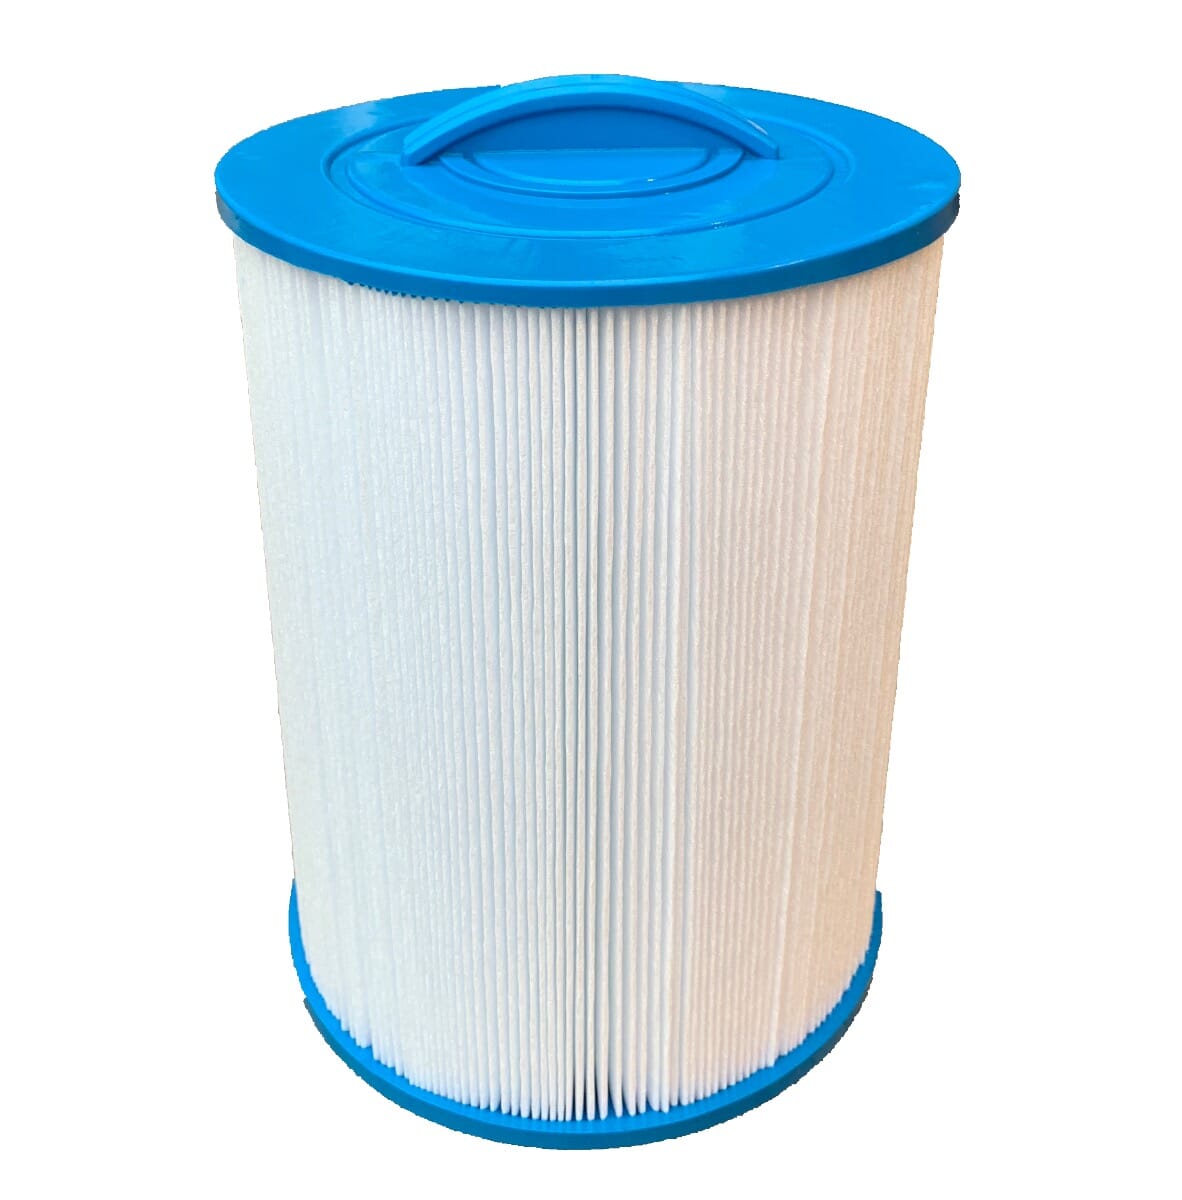 45 sq.ft Screw in SAE Thread Filter 03FIL1400 25252 817-0050 VANBOOGOO Replacement Cartridge For Waterway Front Access Skimmer Coarse Thread - Compatible with Unicel 6CH-940 Filbur FC-0359 2 Pack SPA Filter Replaces for Pleatco PWW50P3